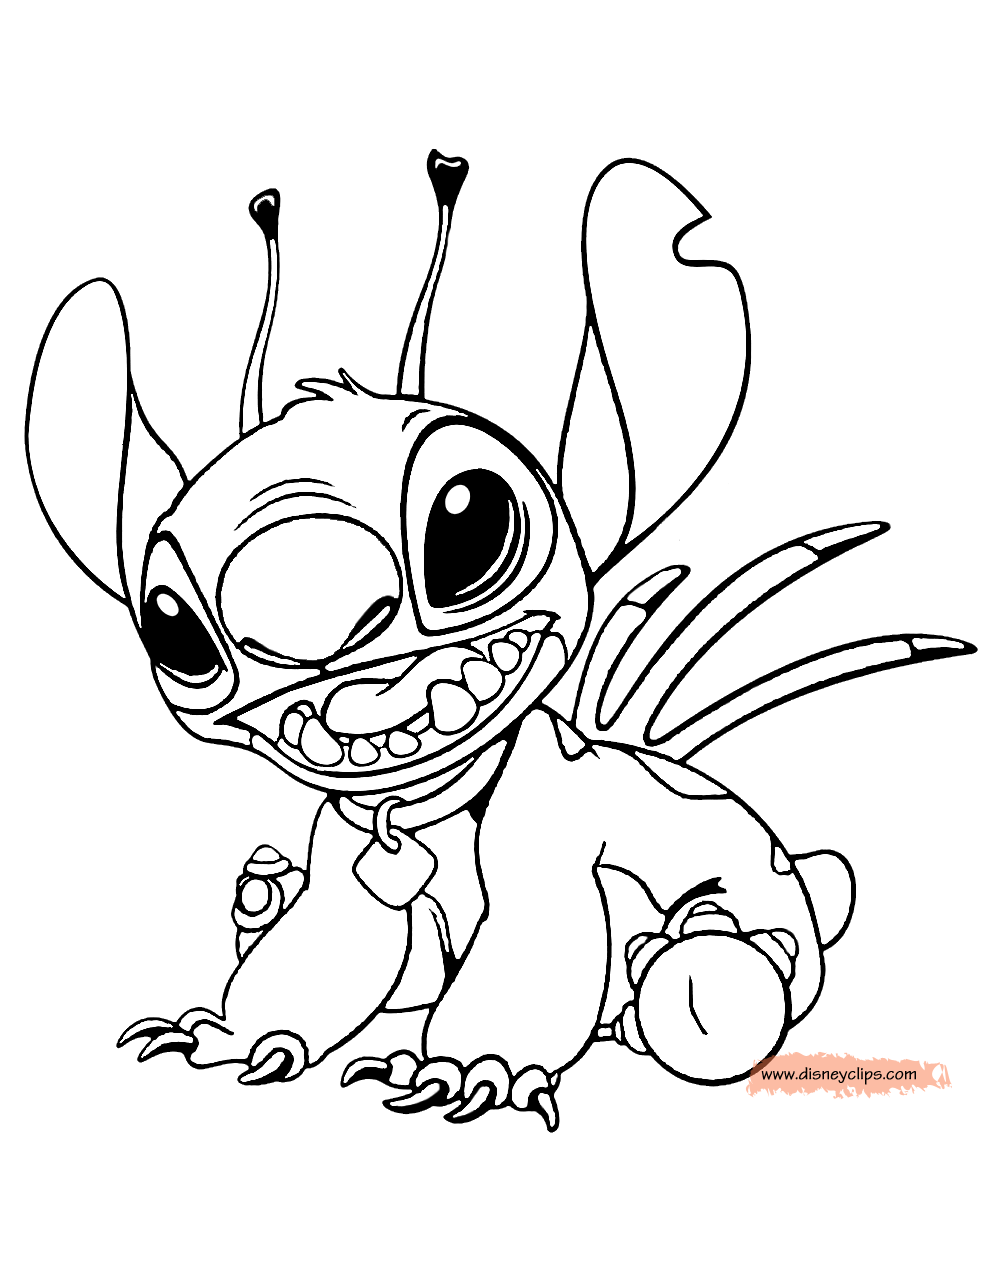 Lilo and Stitch Coloring Pages for Boys, Girls, Teens, Kids